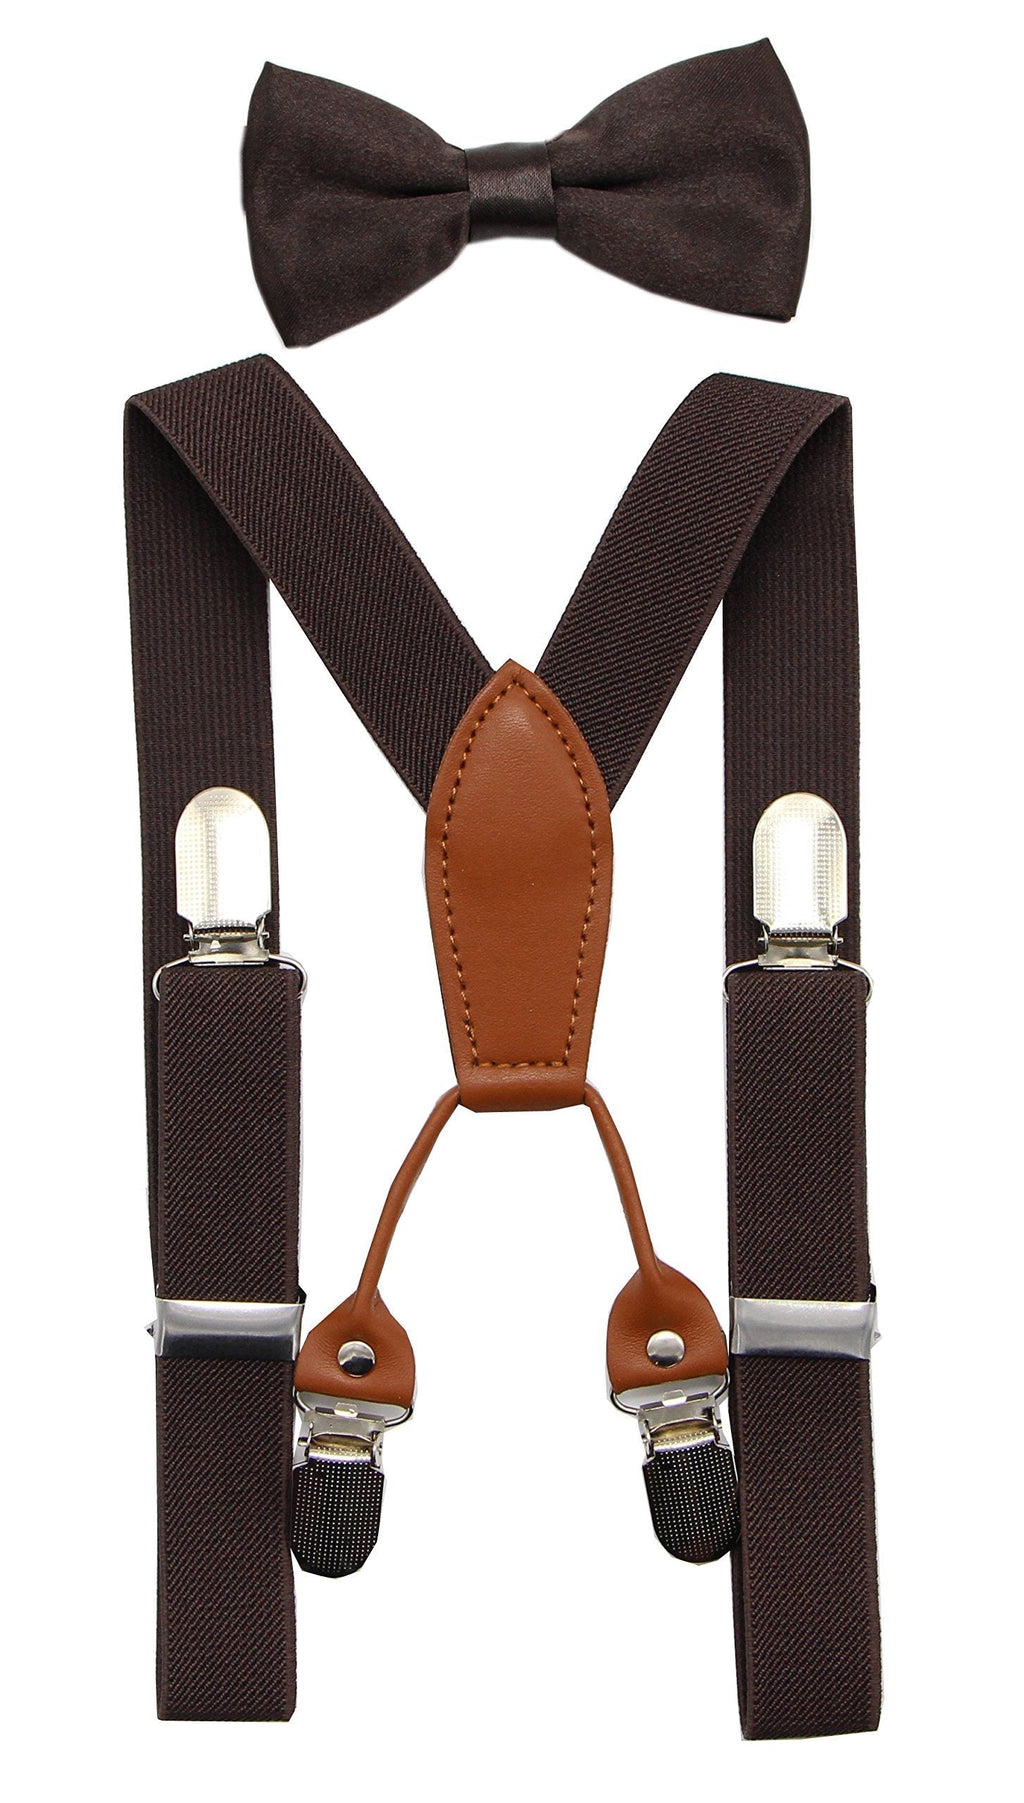 [Australia] - JAIFEI Toddler Kids 4 Clips Adjustable Suspenders and Matching Bow Tie Set Brown 